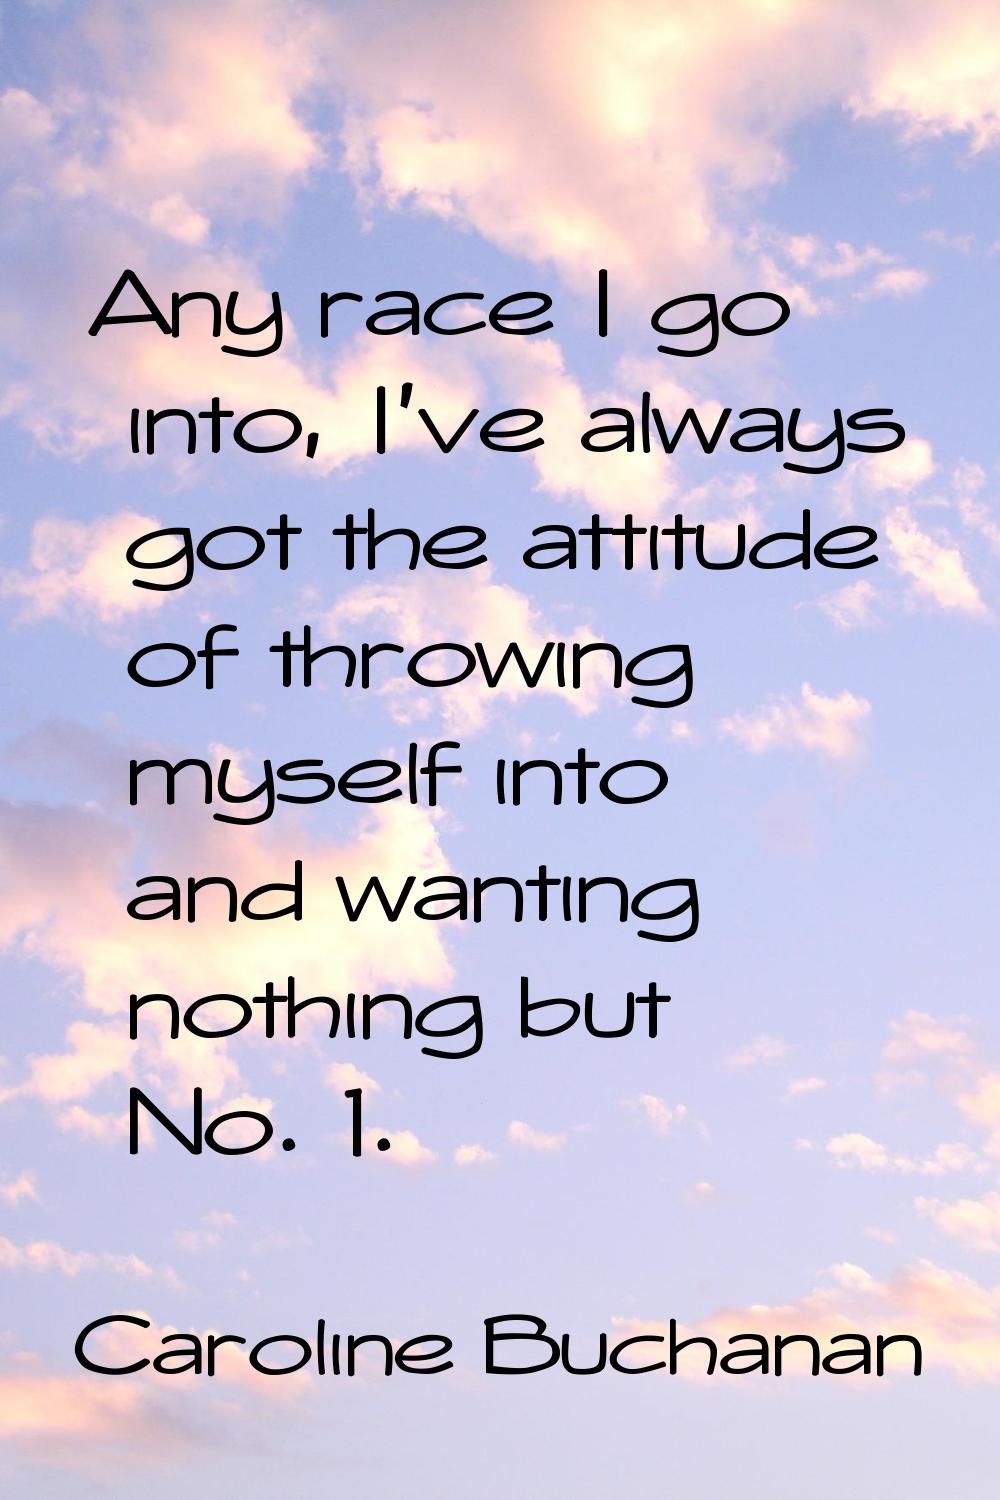 Any race I go into, I've always got the attitude of throwing myself into and wanting nothing but No